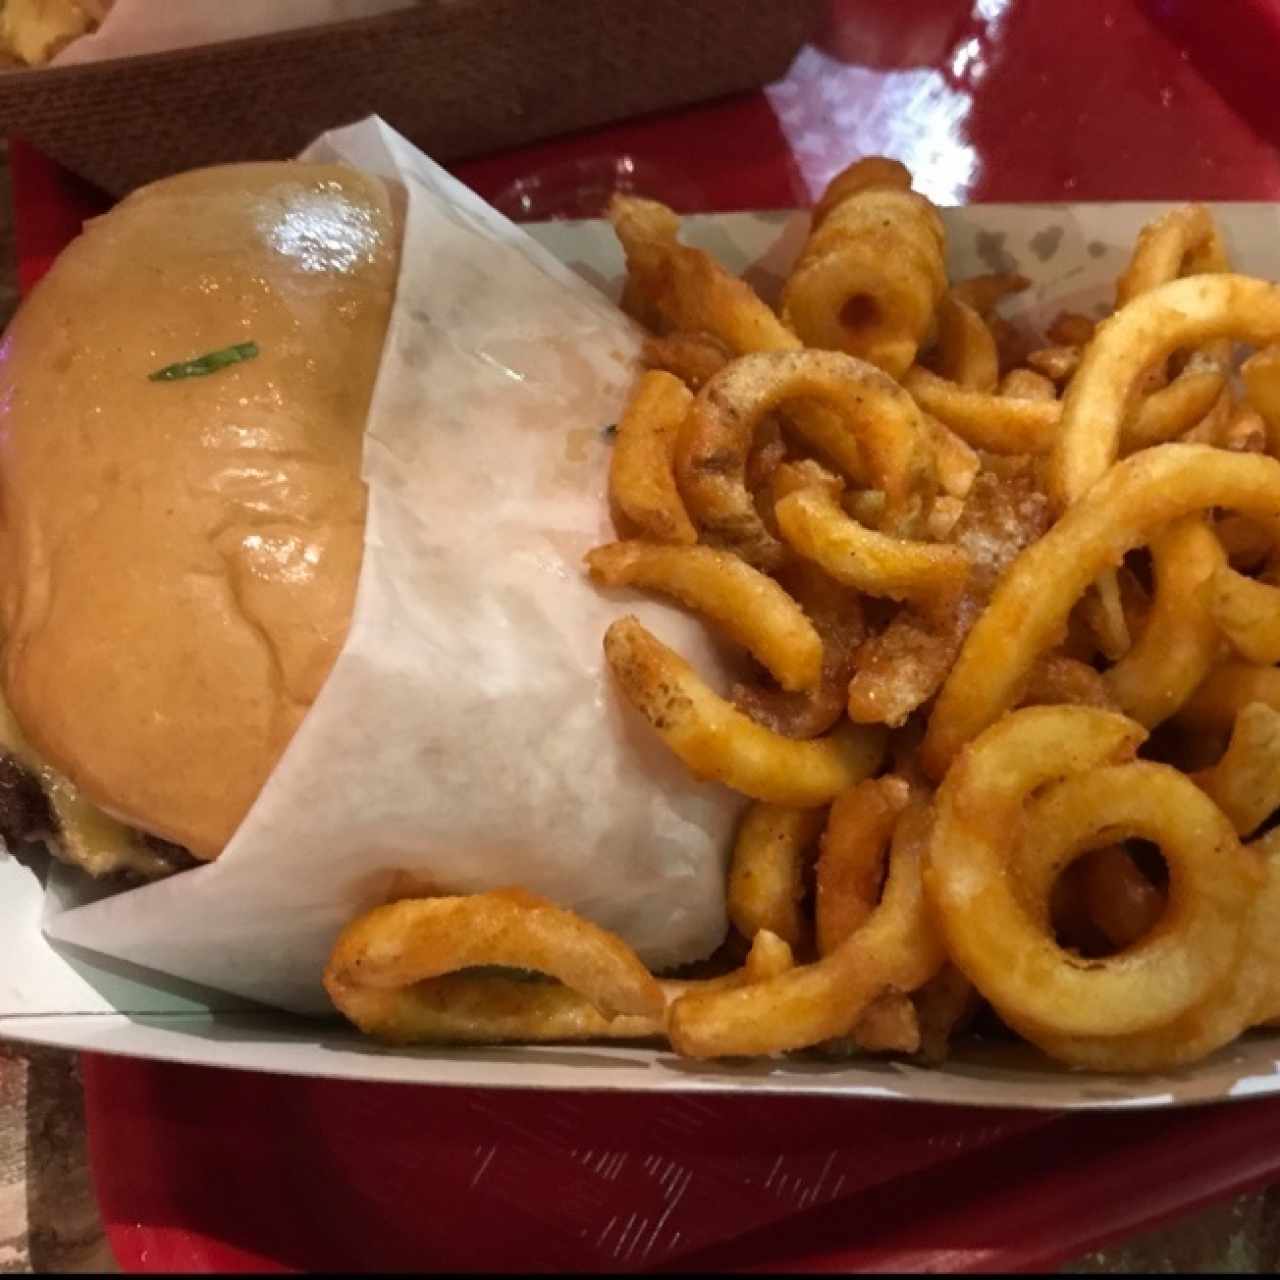 La picky con curly fries